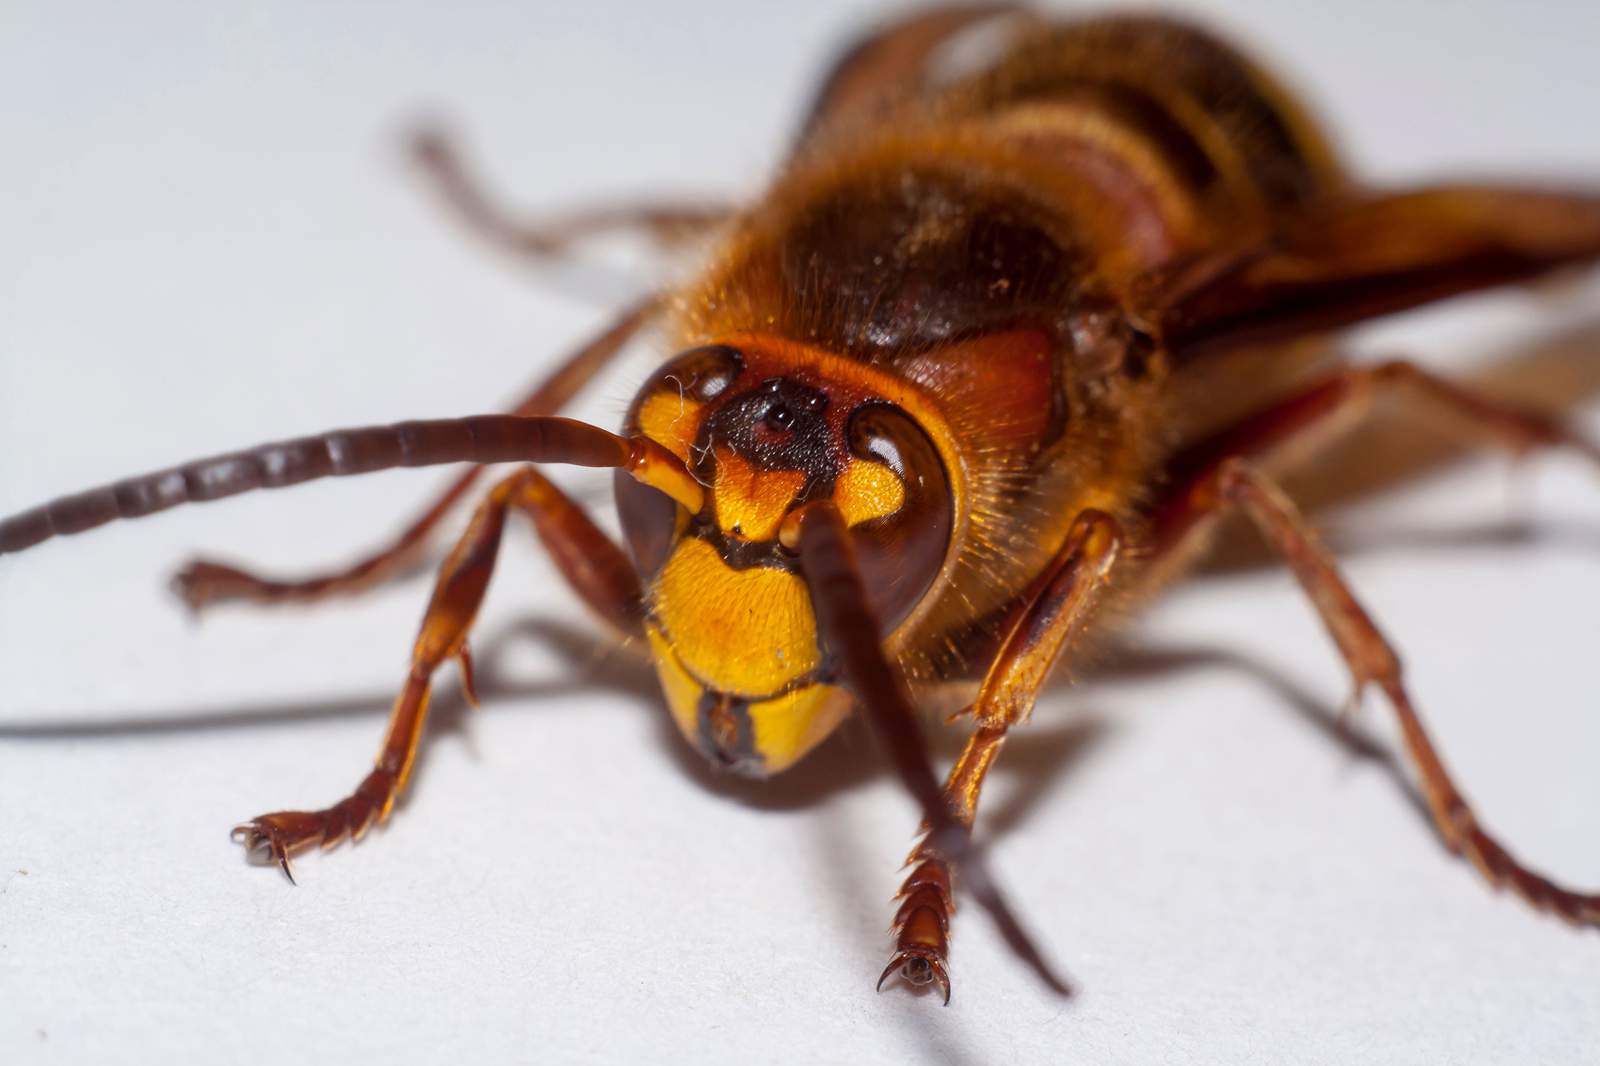 ‘Murder hornets’ have arrived for the first time ever in the U.S., report says